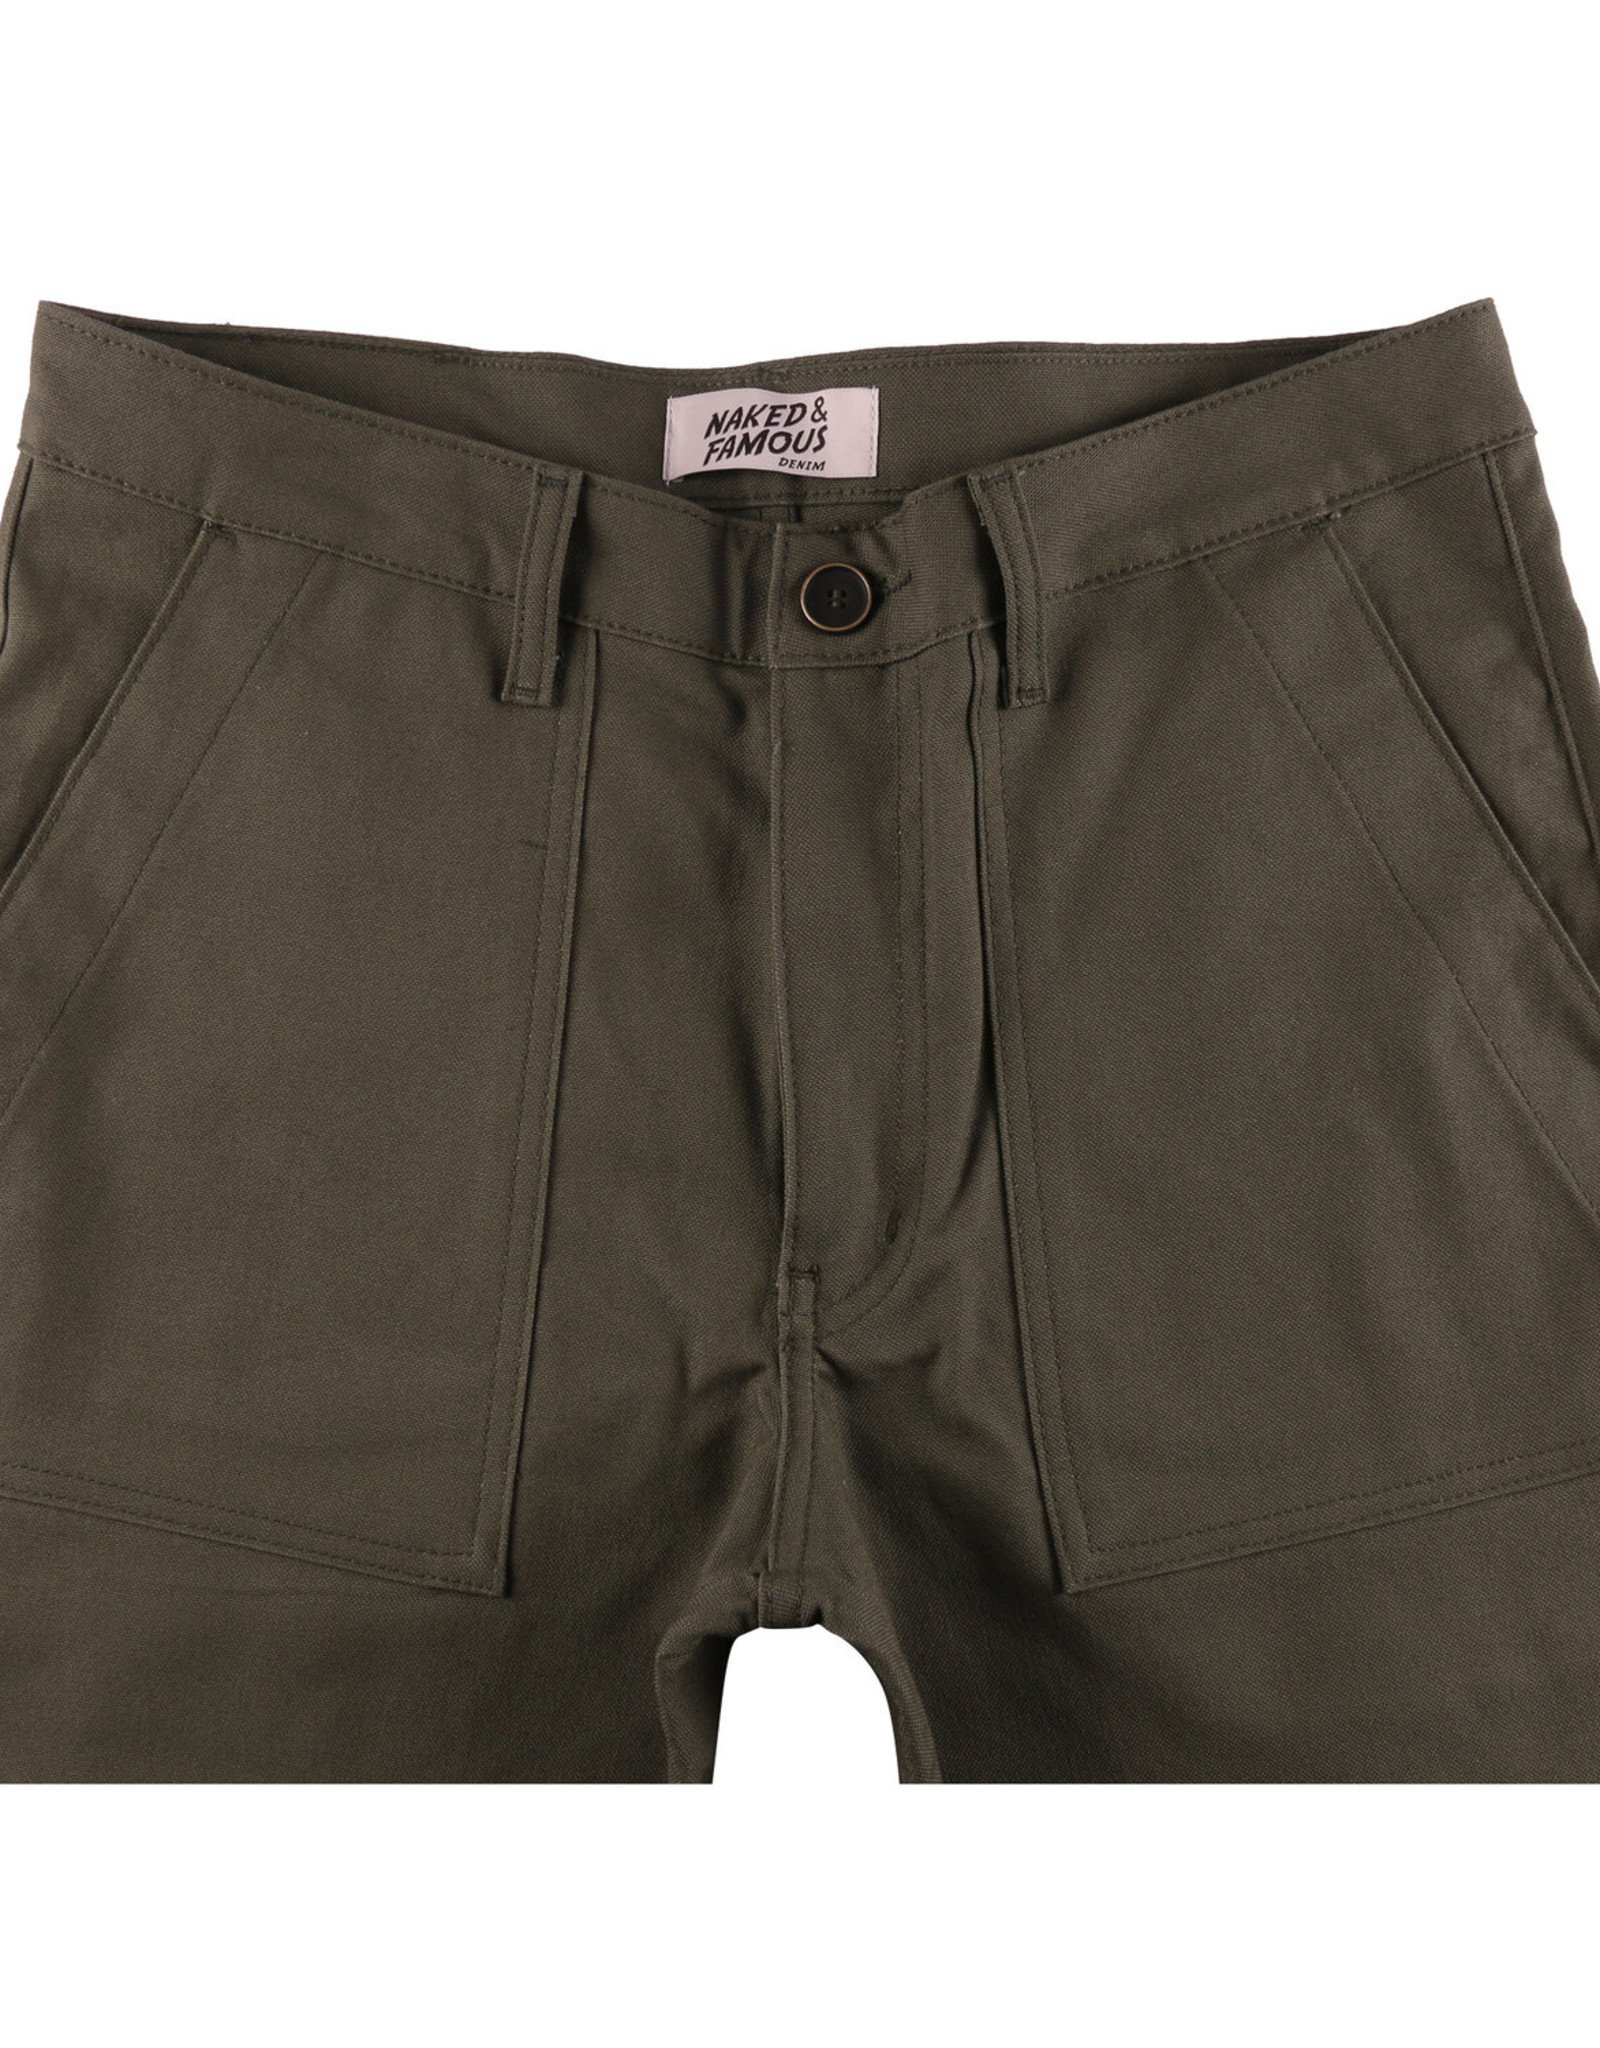 Naked & Famous - Work Pant - Green Canvas